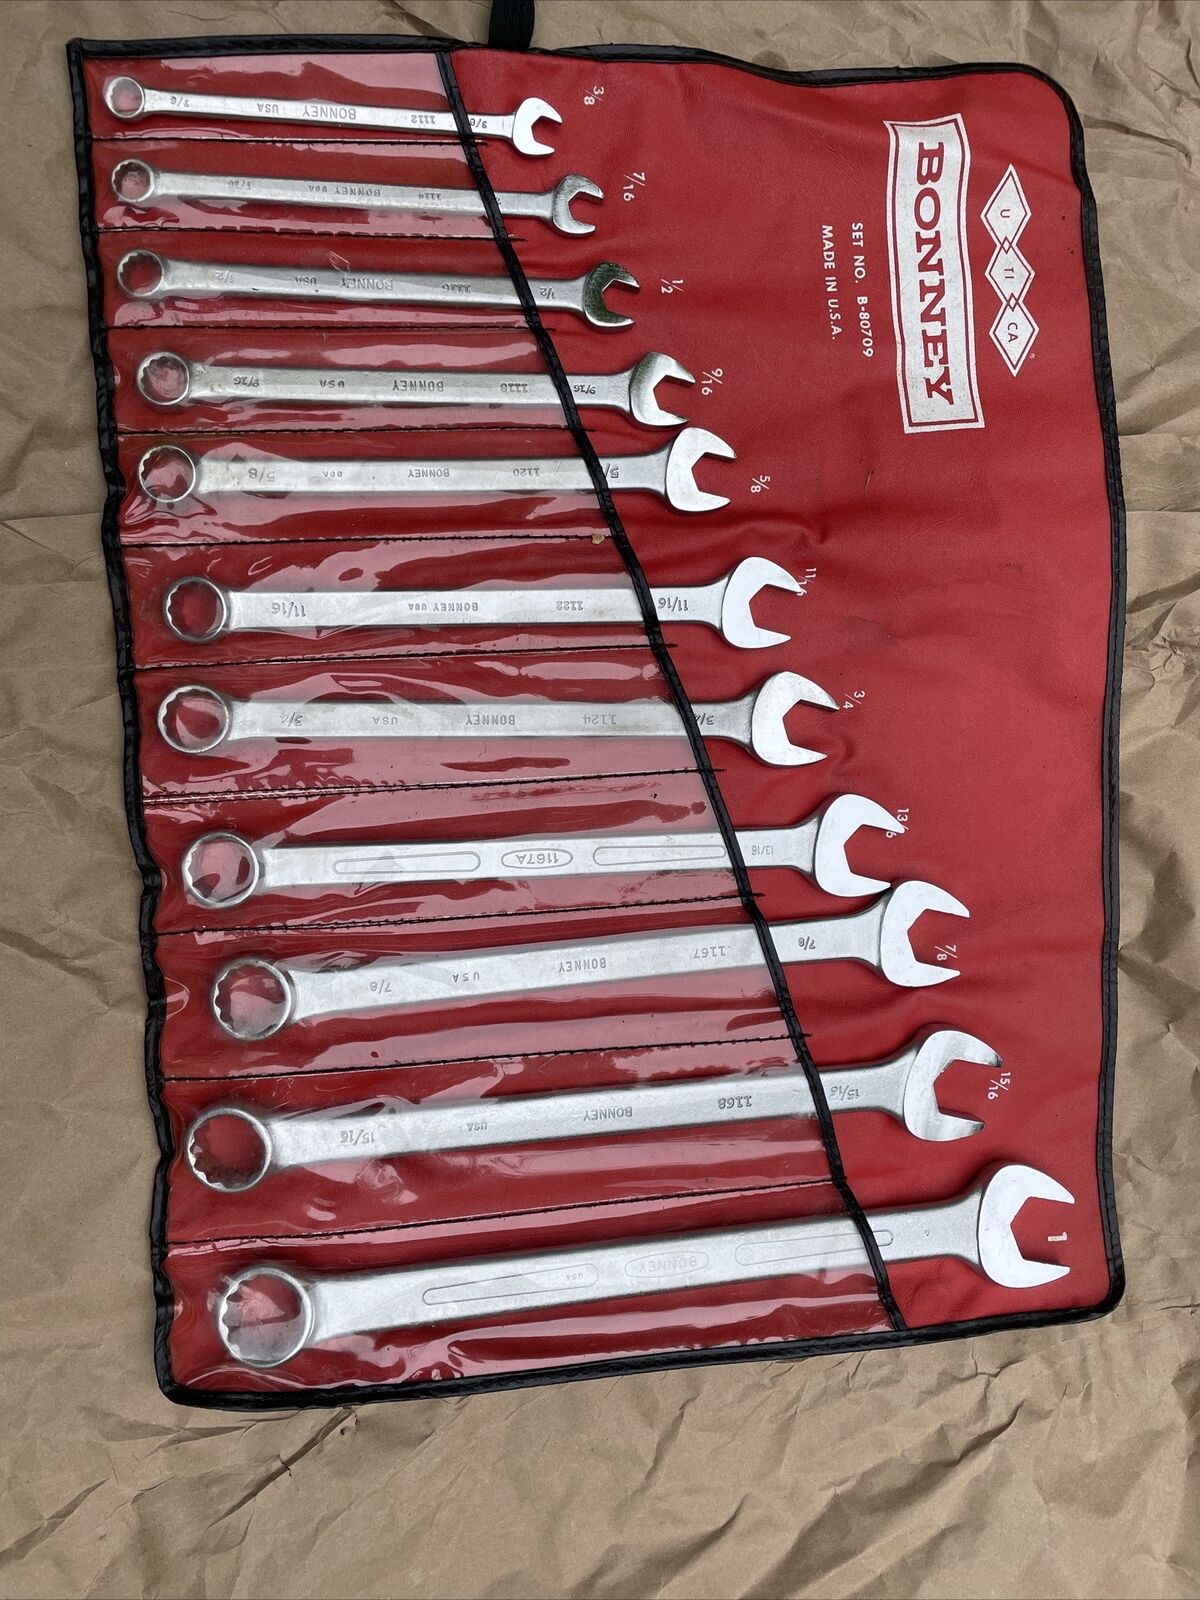 Bonney 11 Piece Combination Wrench Set 3/8” To 1”- No. B-80709.